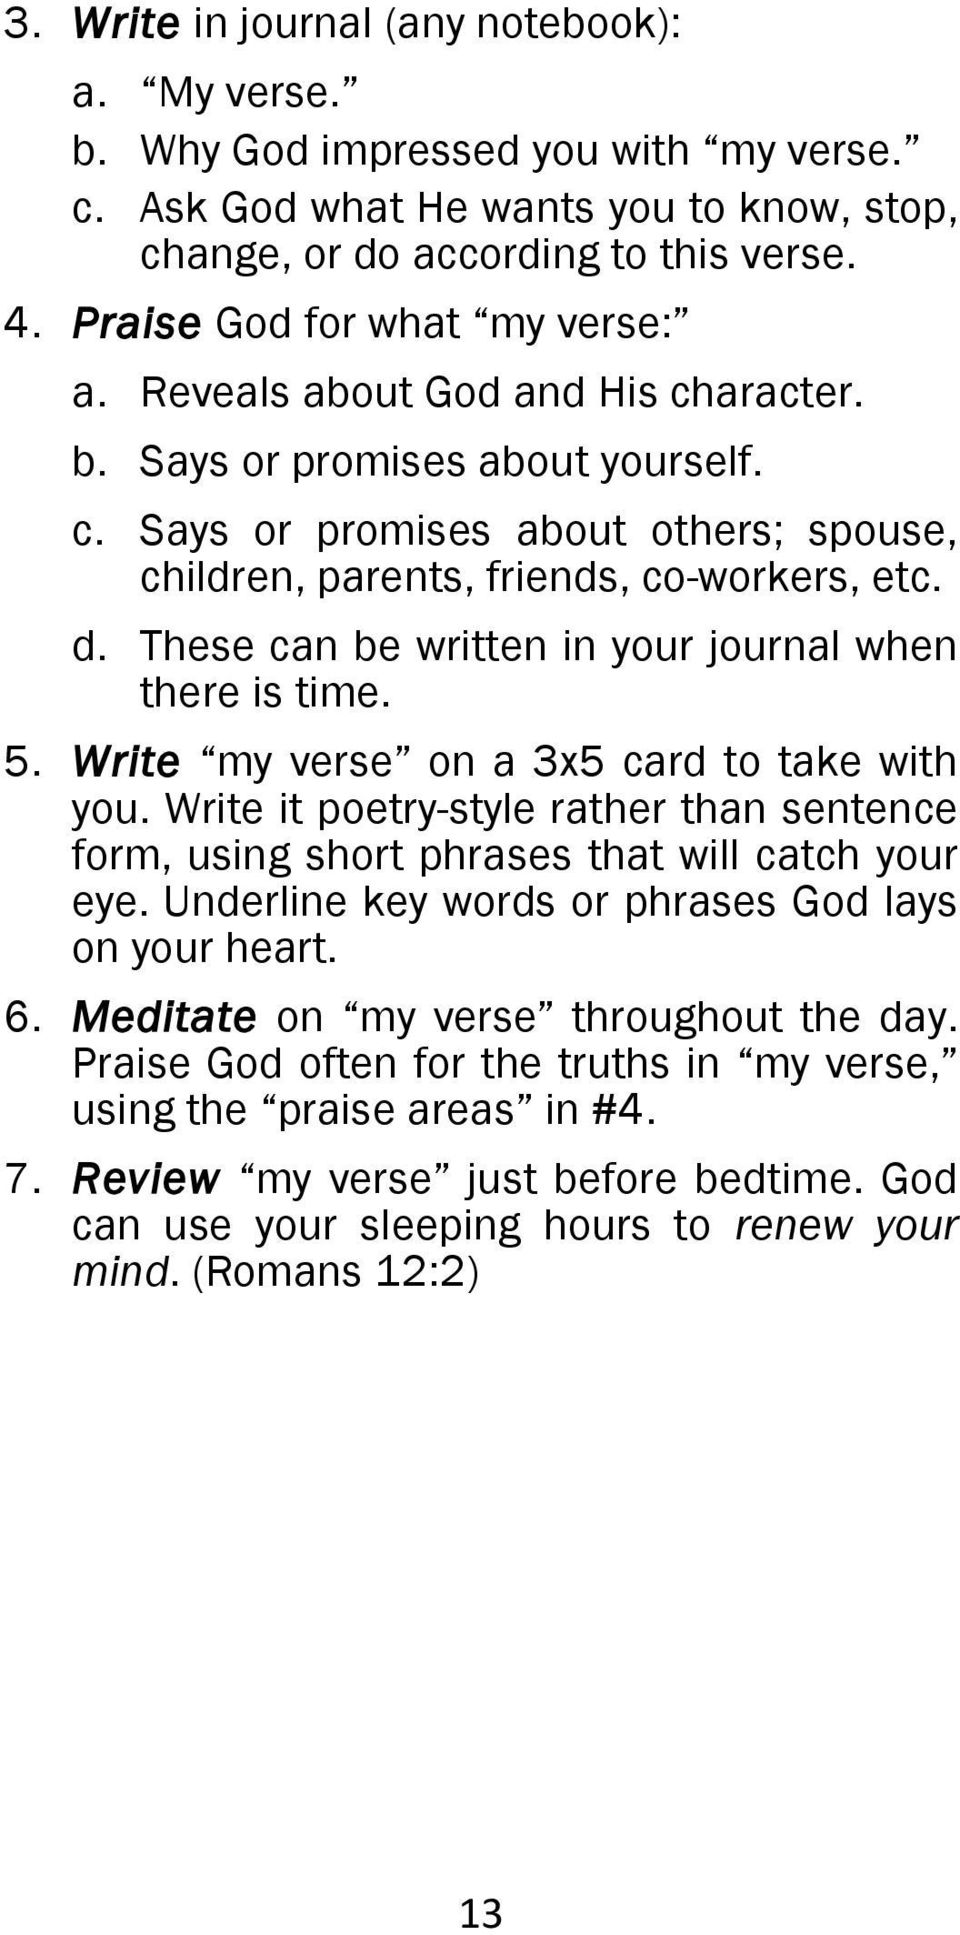 These can be written in your journal when there is time. 5. Write my verse on a 3x5 card to take with you.